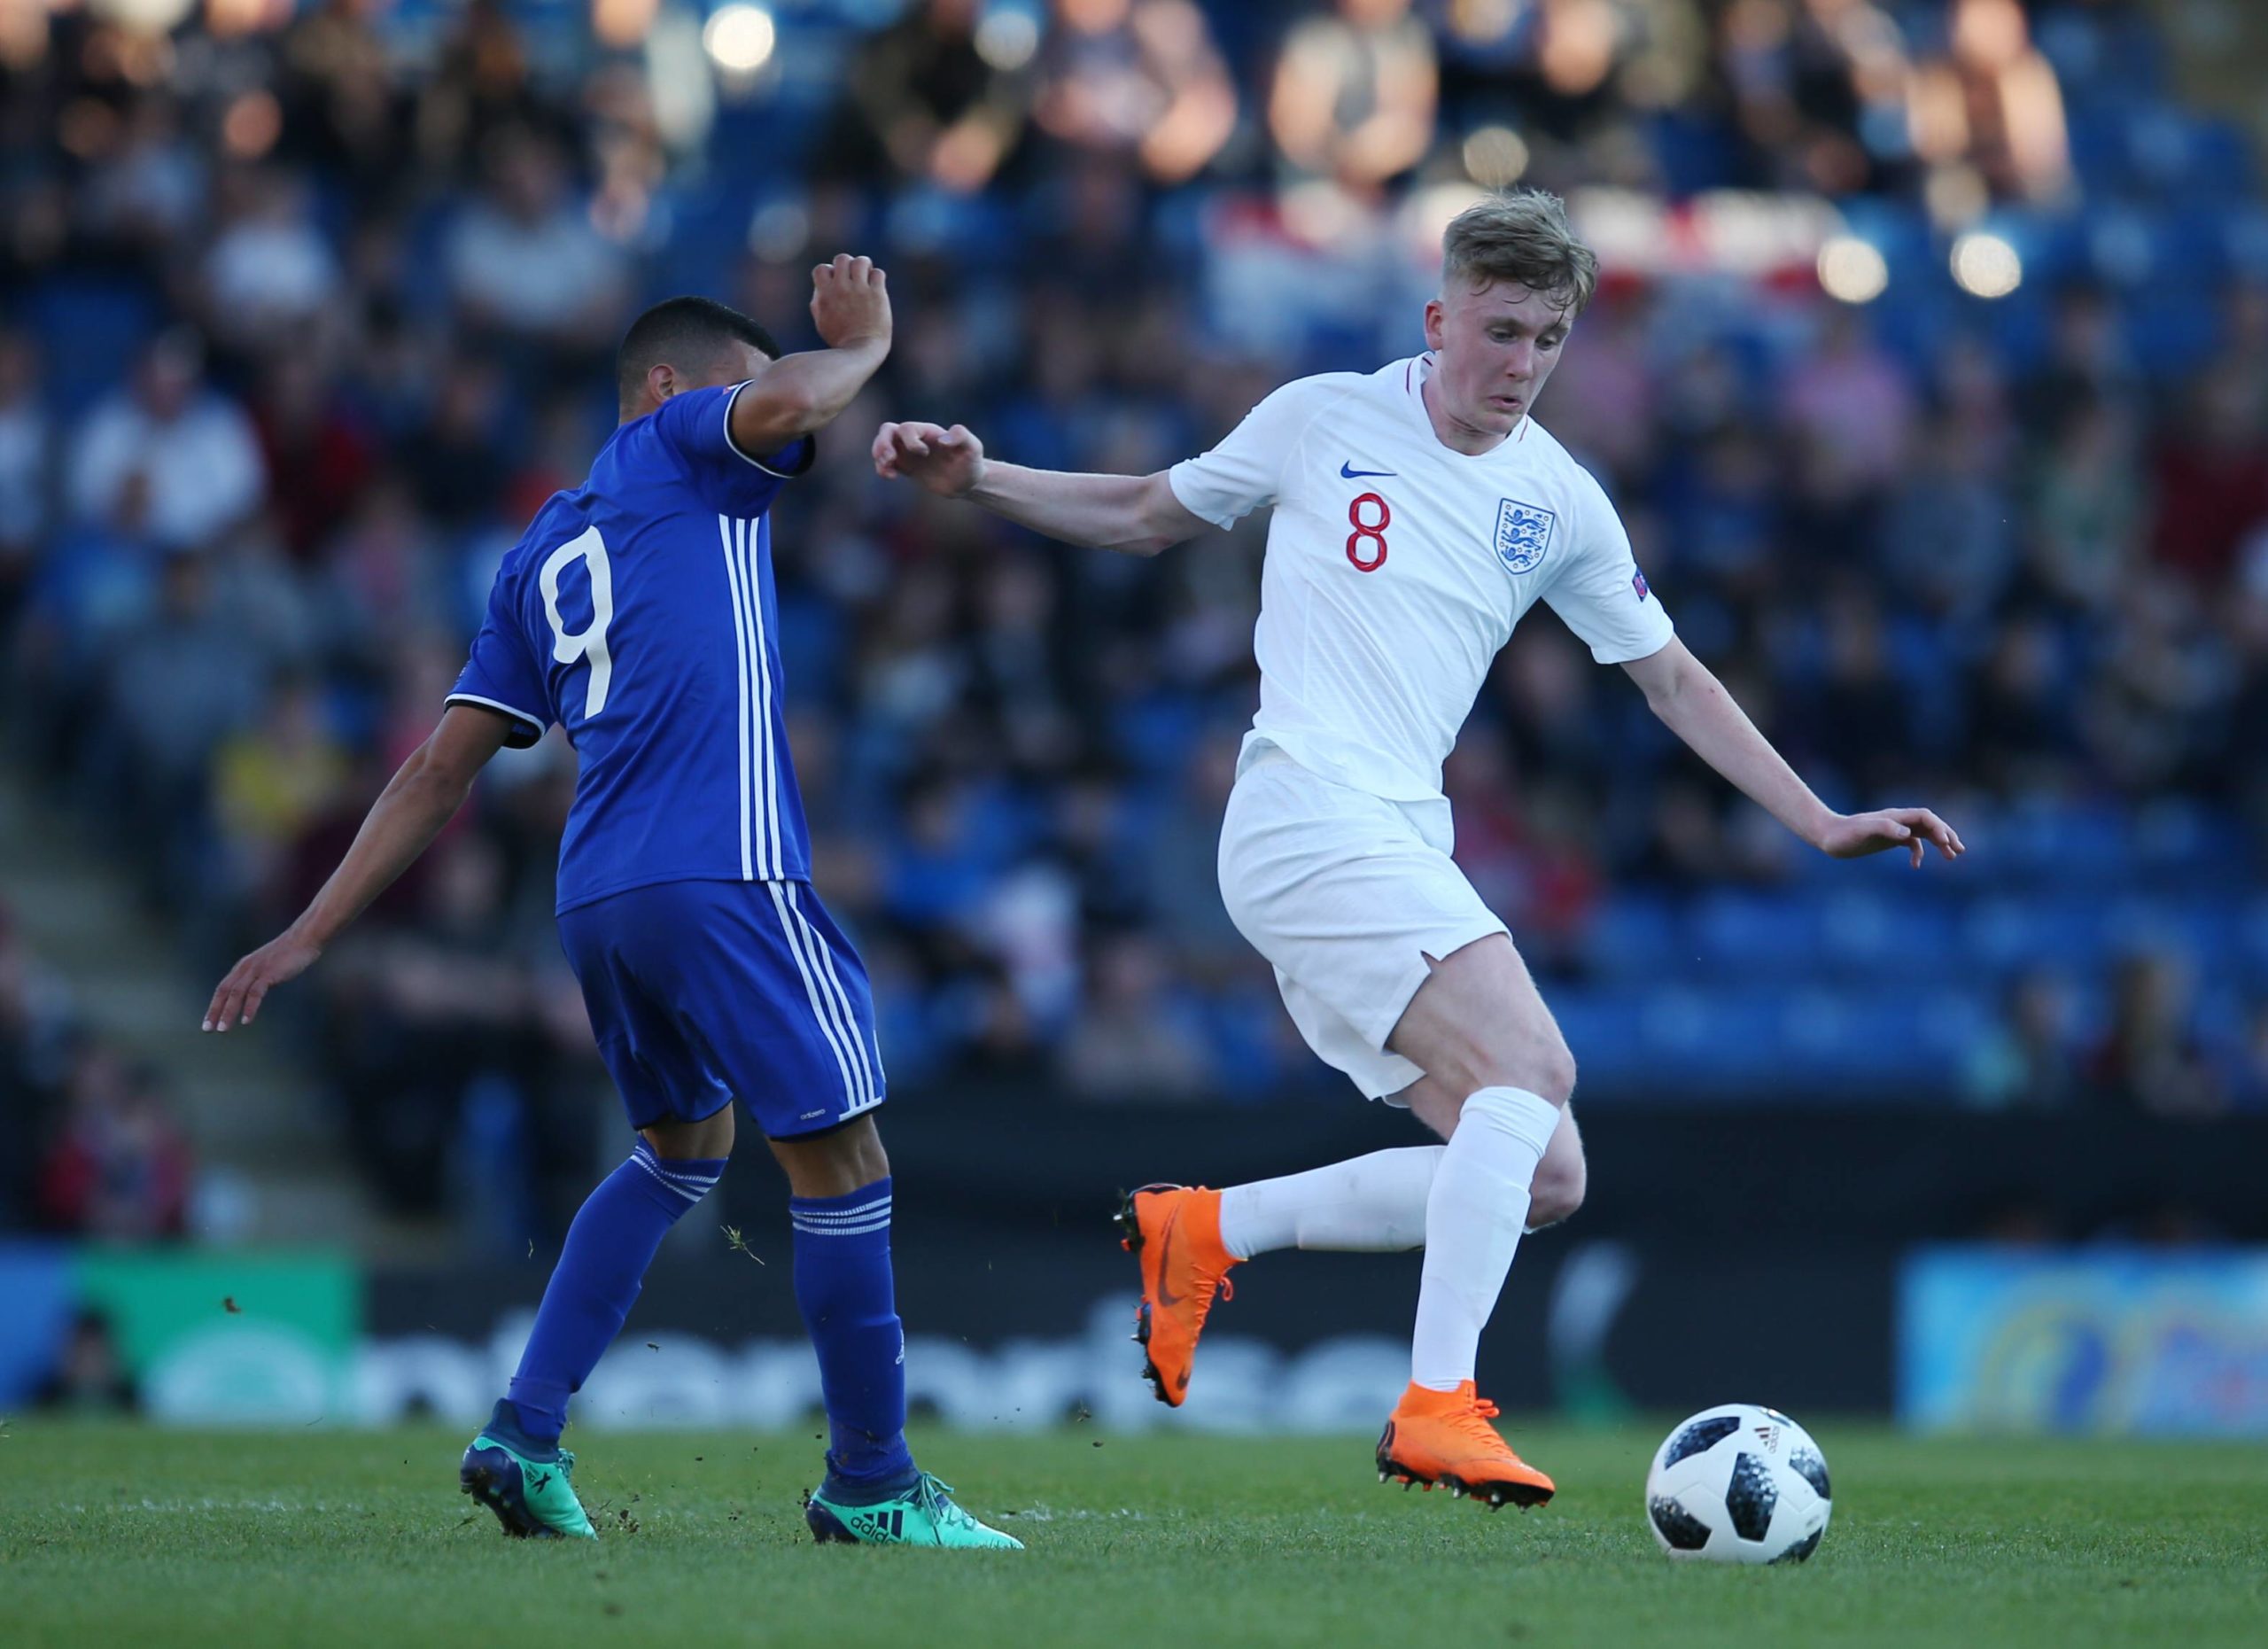 Thomas Doyle of England and Liel Abada of Israel during the group stage match at Proact Stadium, Chesterfield. Picture date 4th May 2018. Picture credit should read: Simon Bellis/Sportimage PUBLICATIONxNOTxINxUK